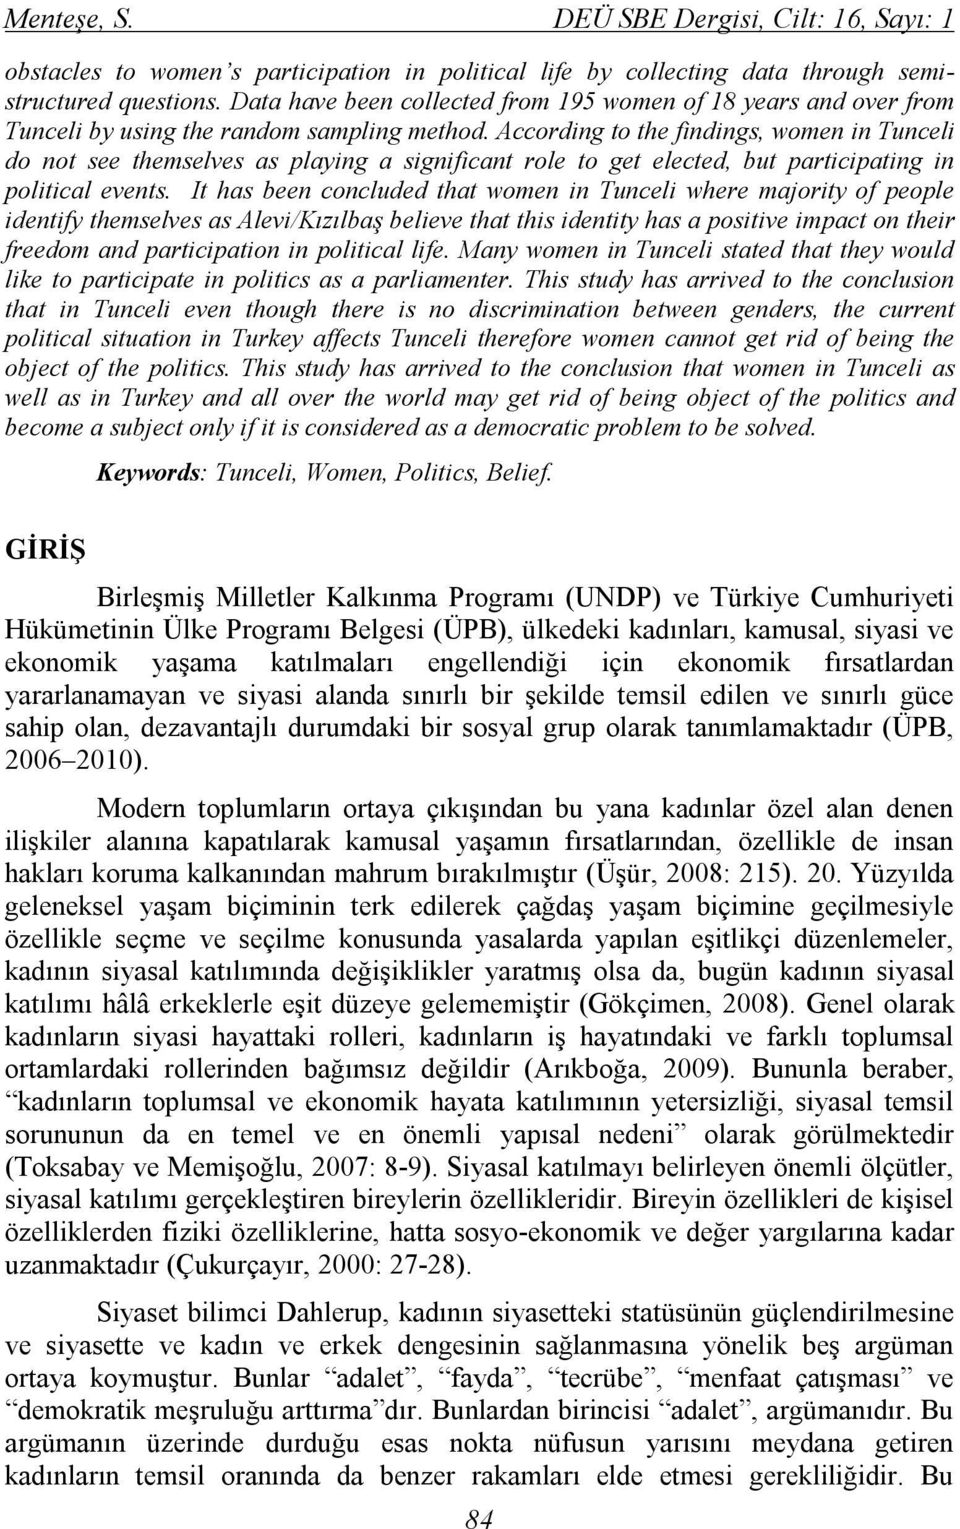 According to the findings, women in Tunceli do not see themselves as playing a significant role to get elected, but participating in political events.